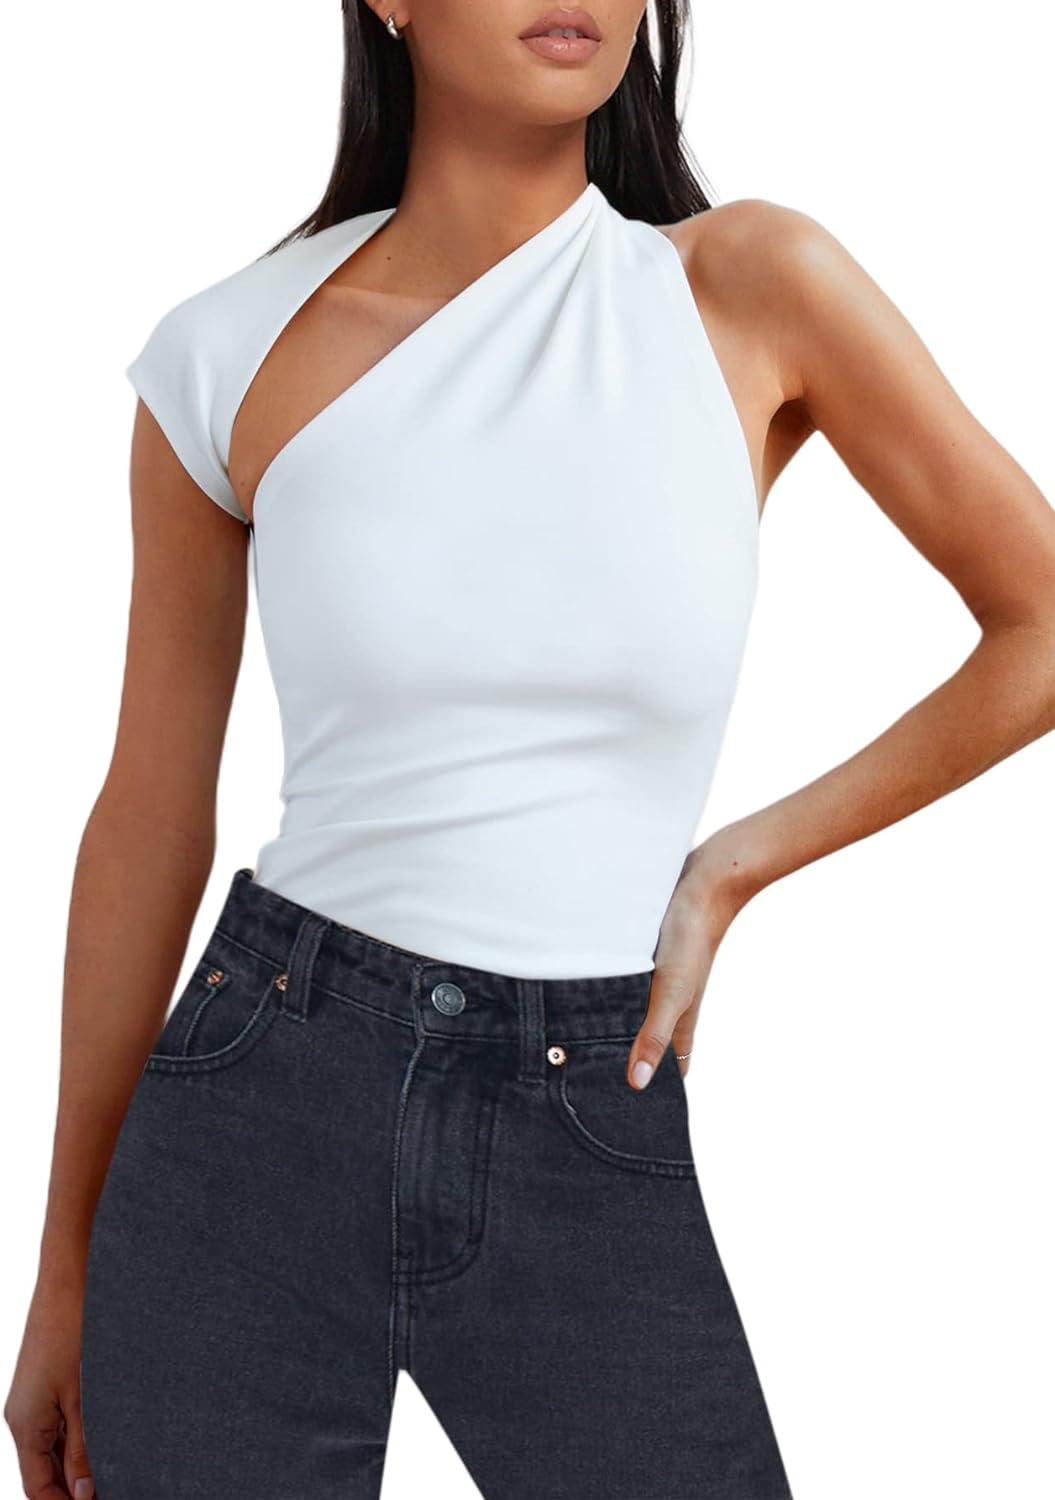 SOFIA'S CHOICE Women's Puff Long Sleeve Crop Top Sexy Ruched Front